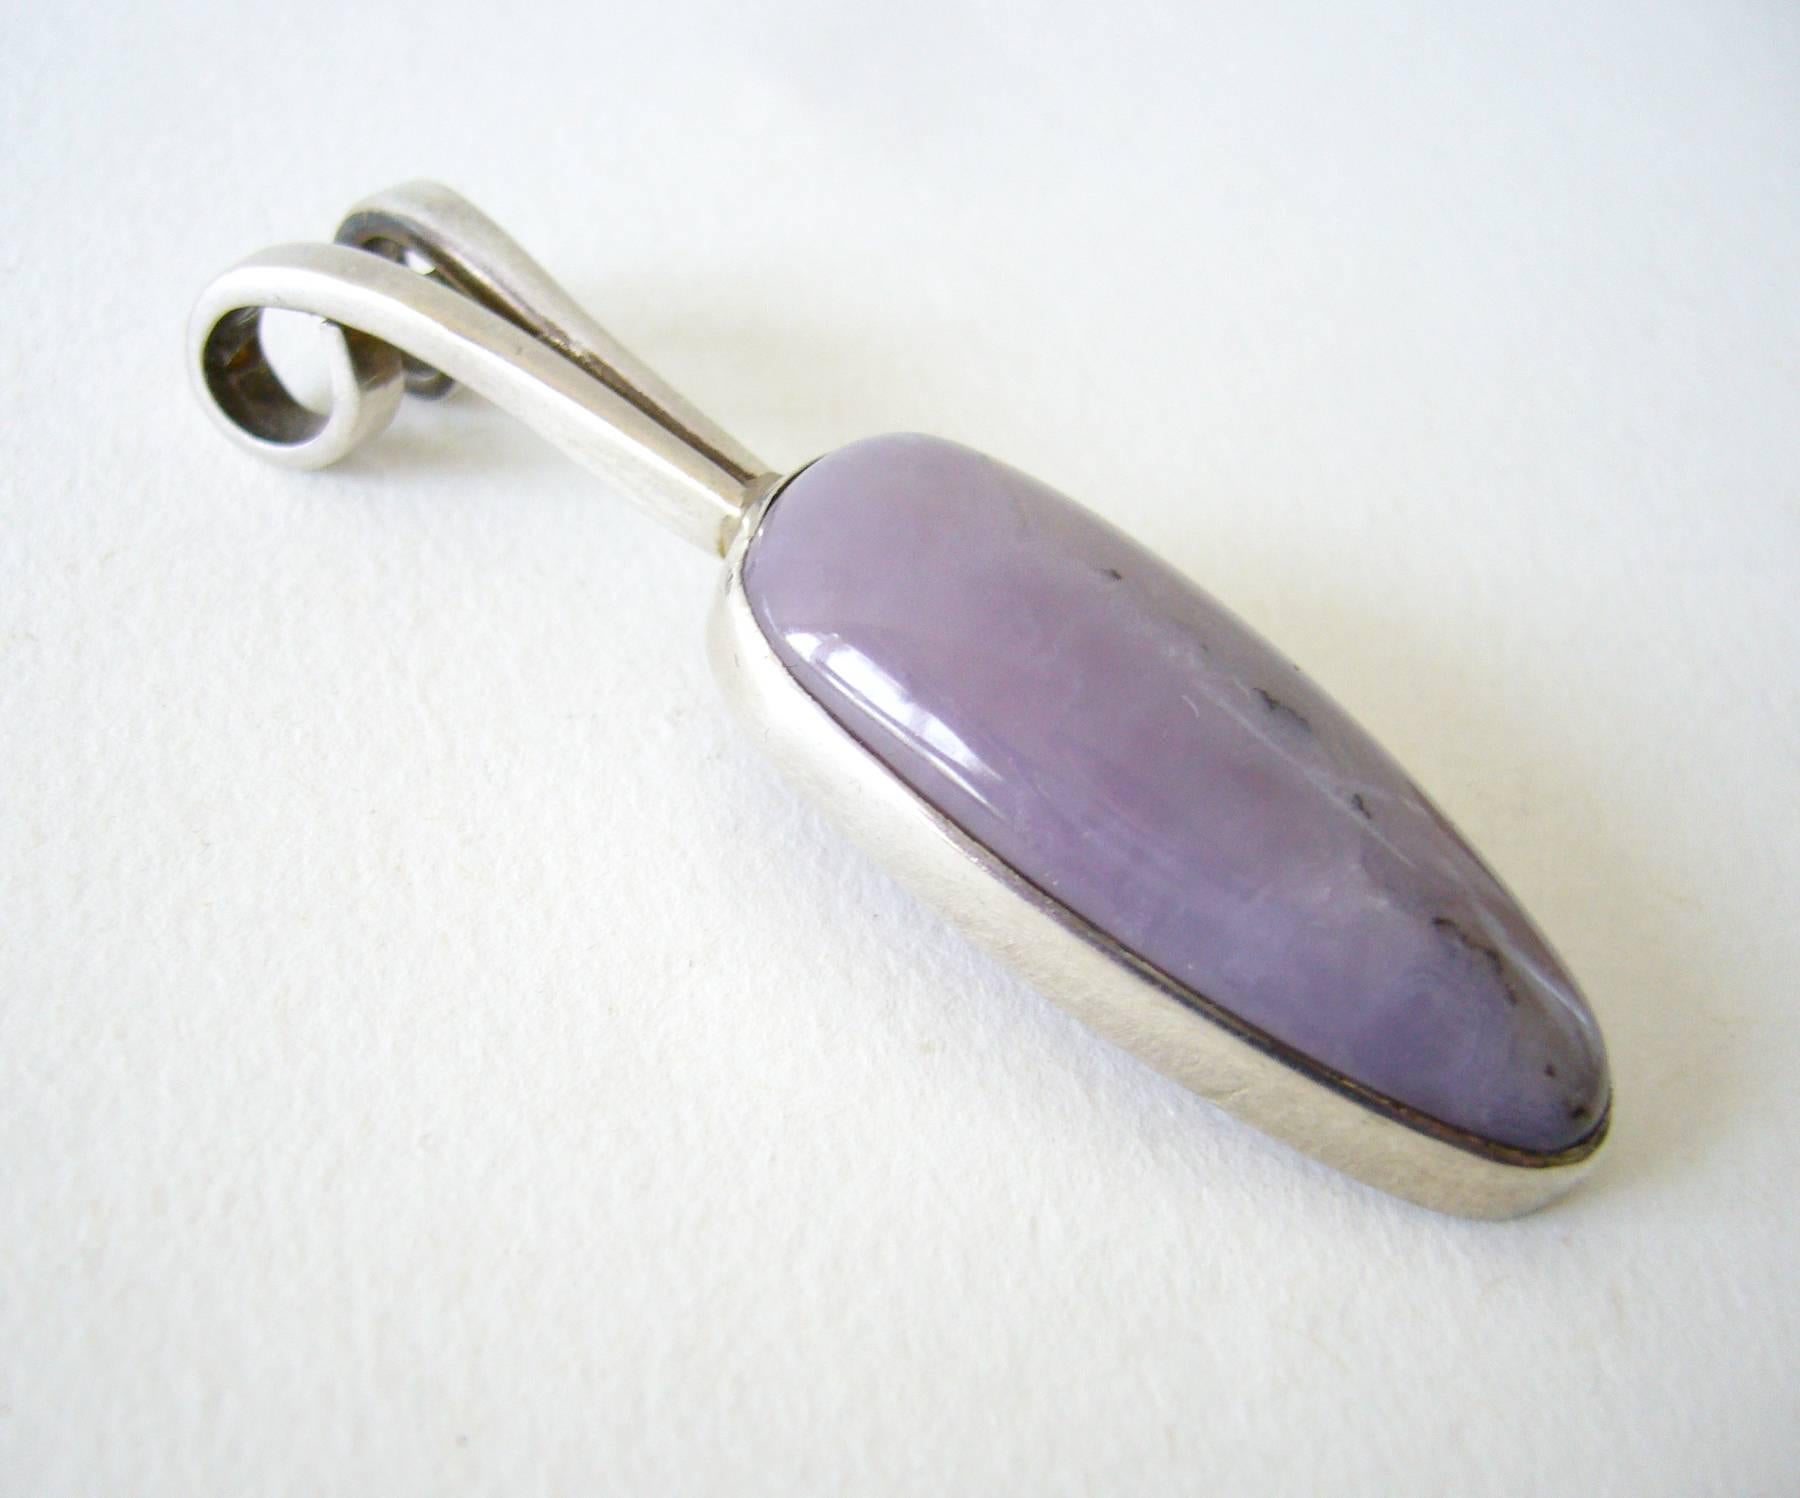 Lavender agate pendant set in sterling silver created by jeweler Jack Nutting of San Francisco, California.  Pendant measures 2 5/8